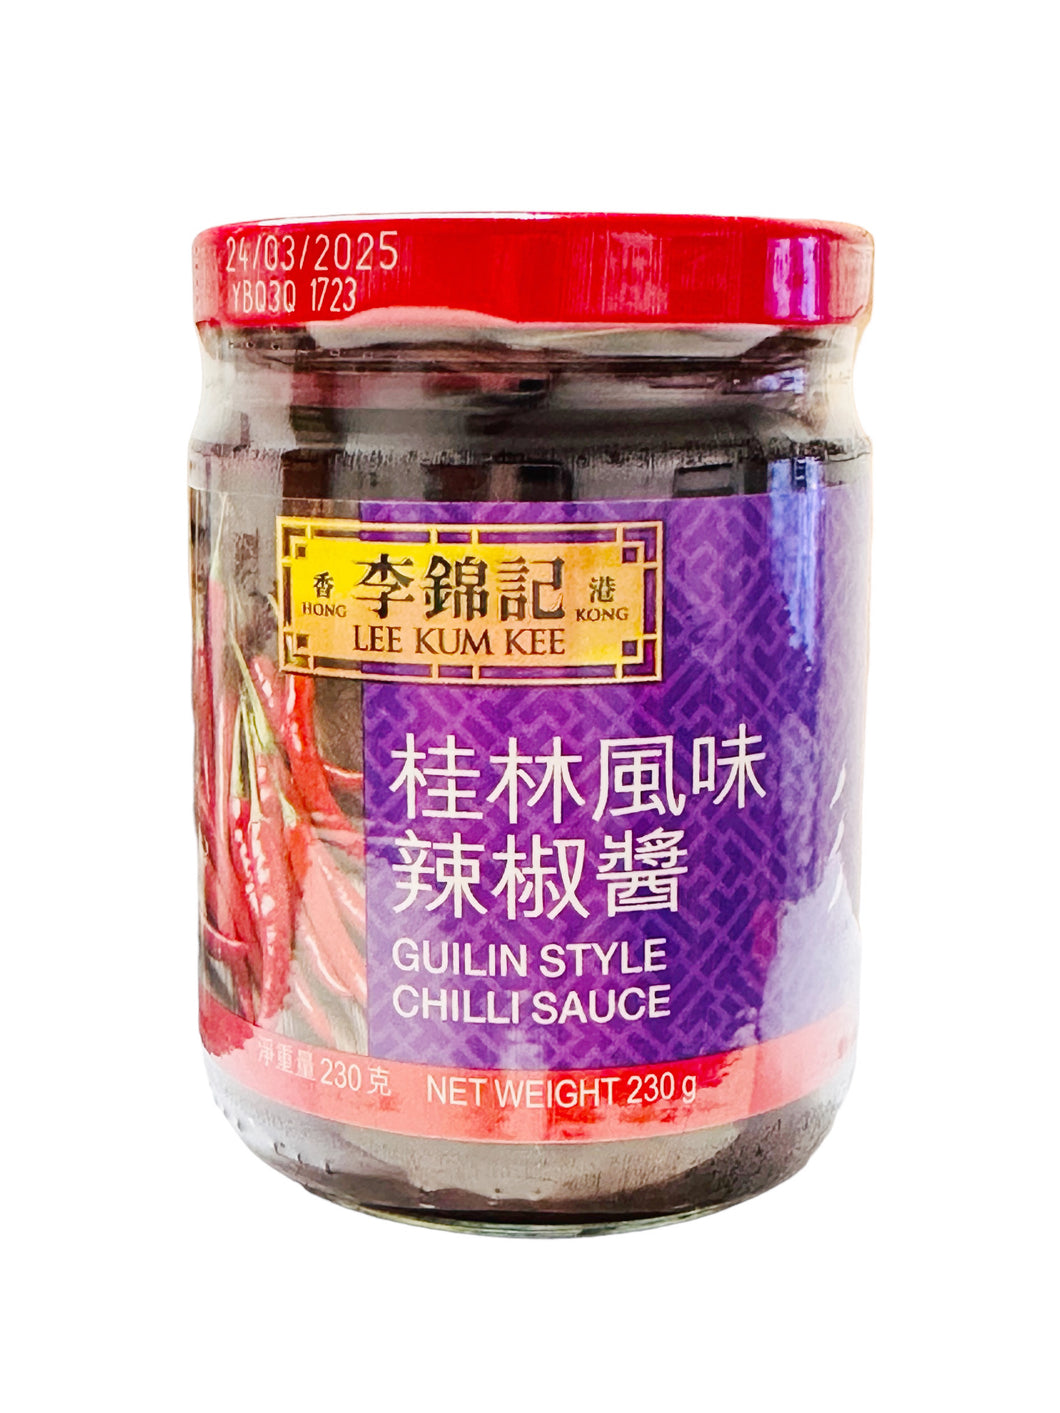 LKK Guilin Style Chili Sauce 230g李锦记桂林辣椒酱